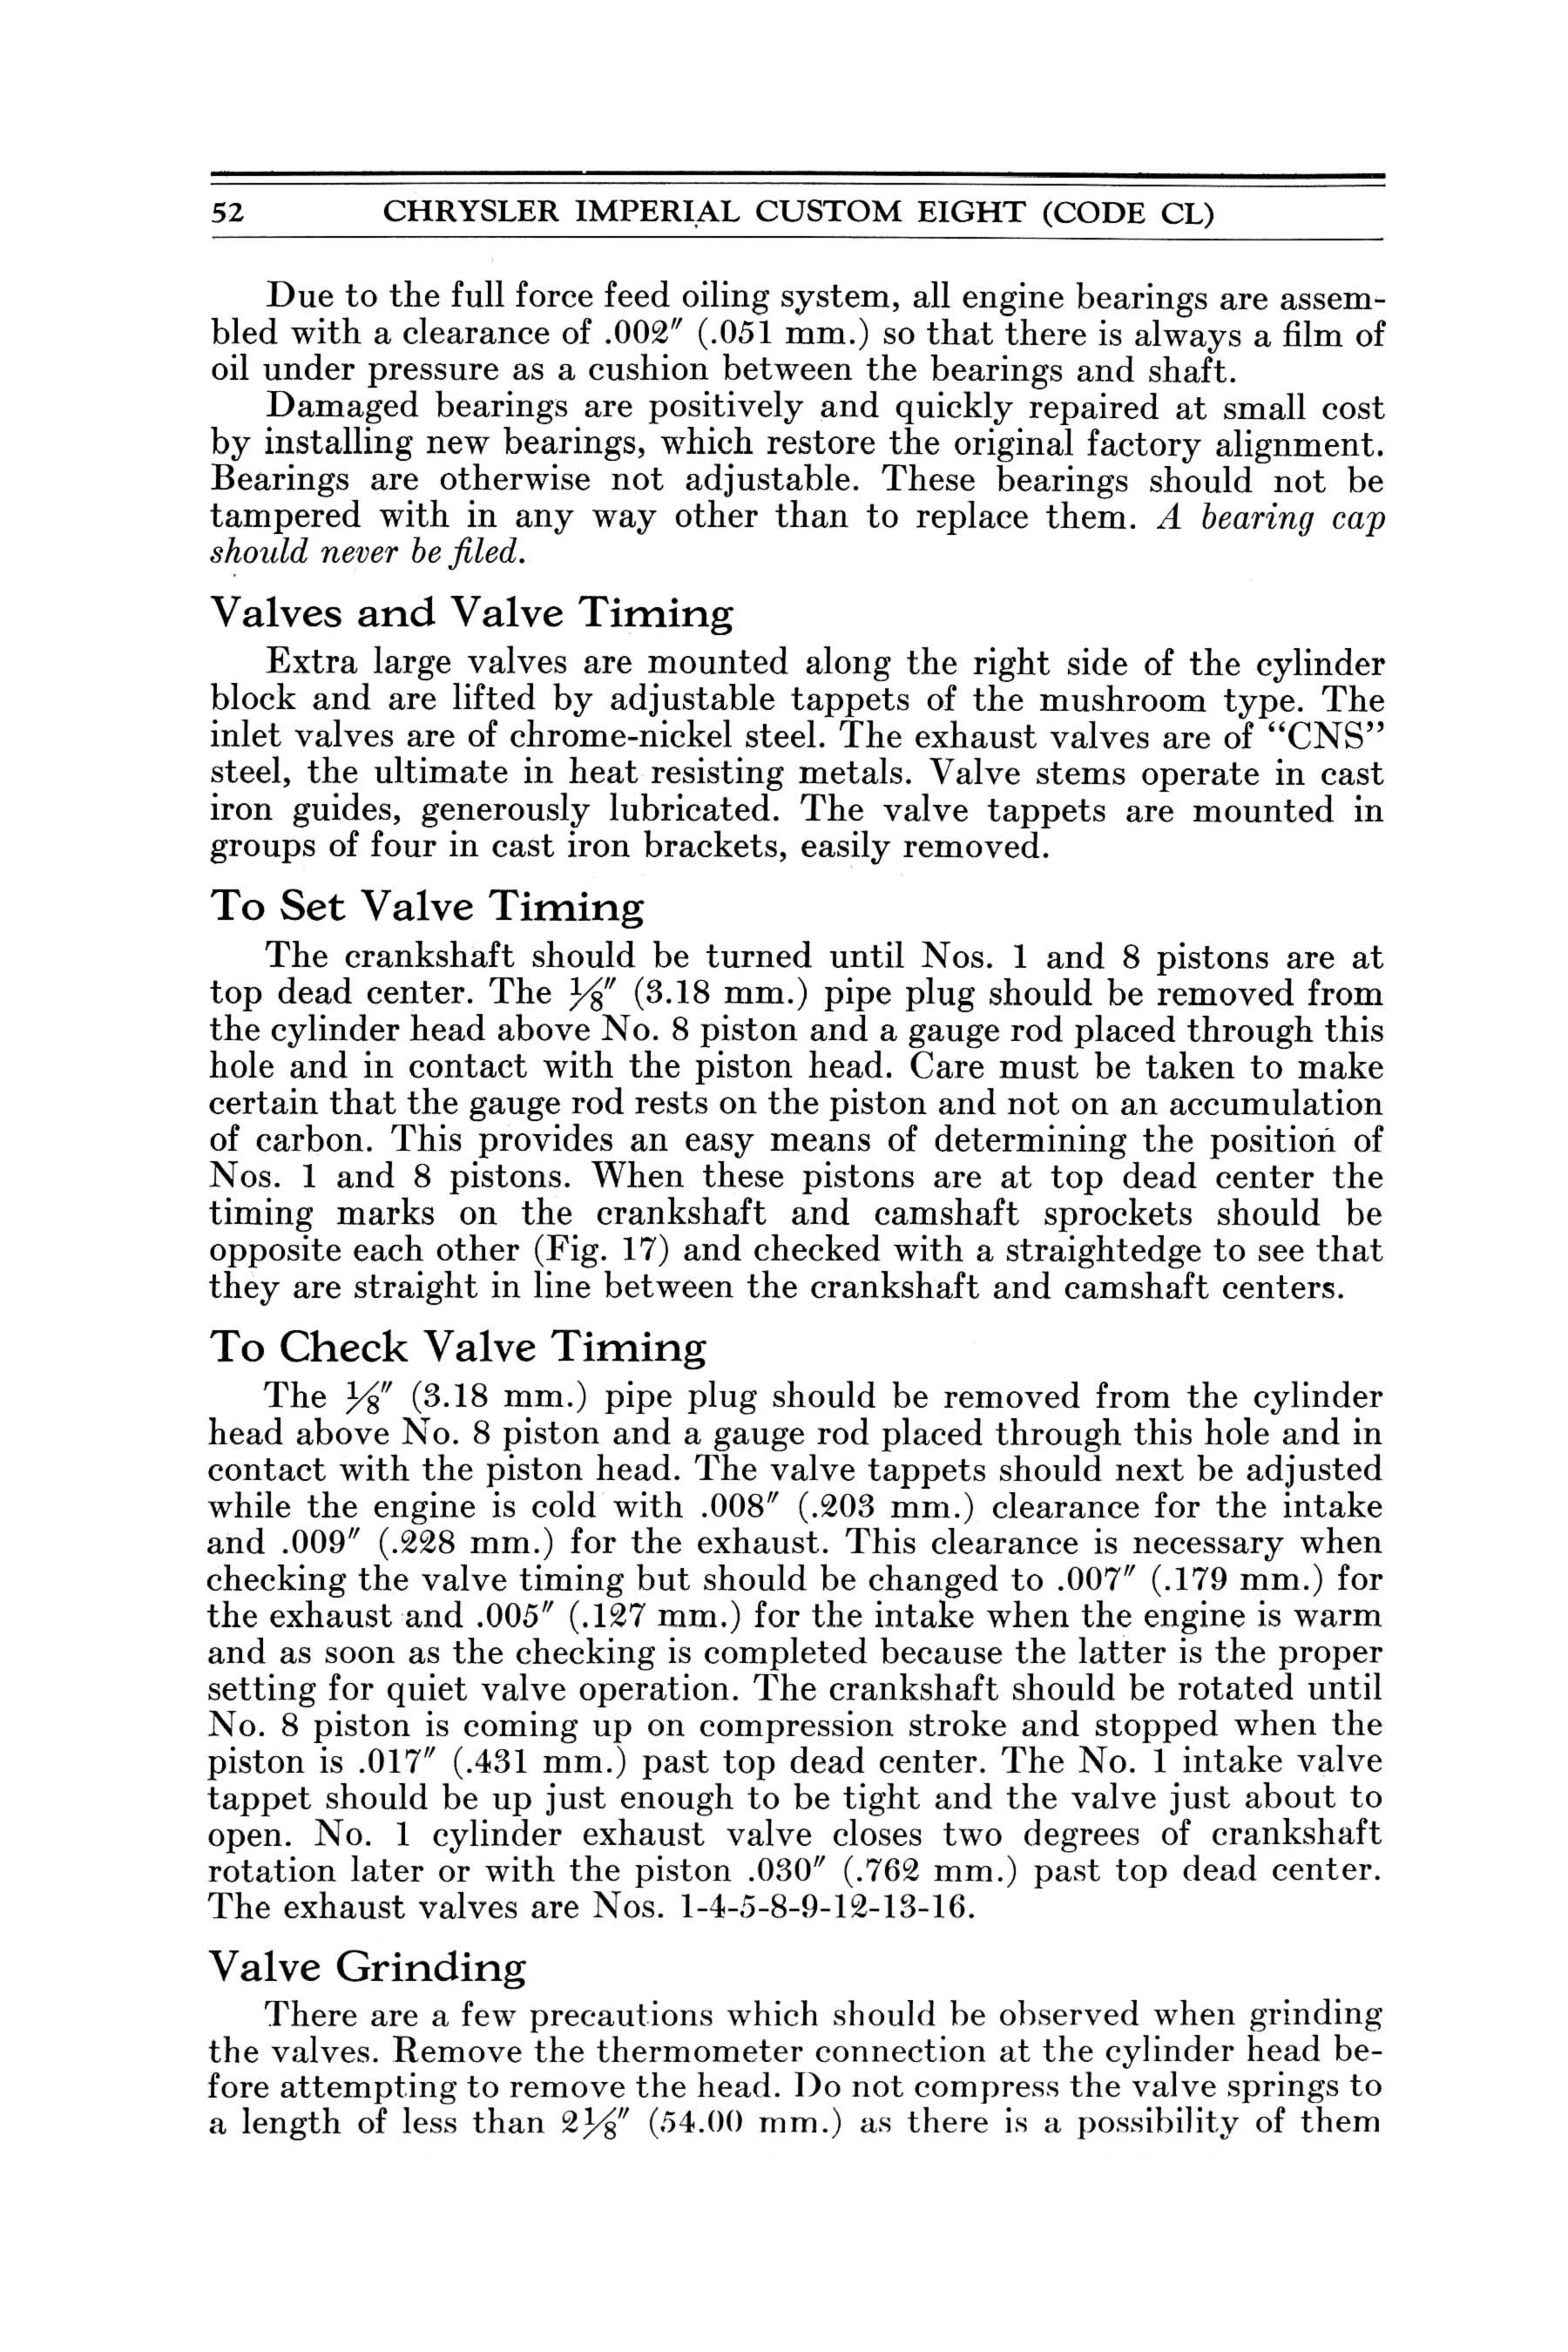 1932 Chrysler Imperial Instruction Book Page 27